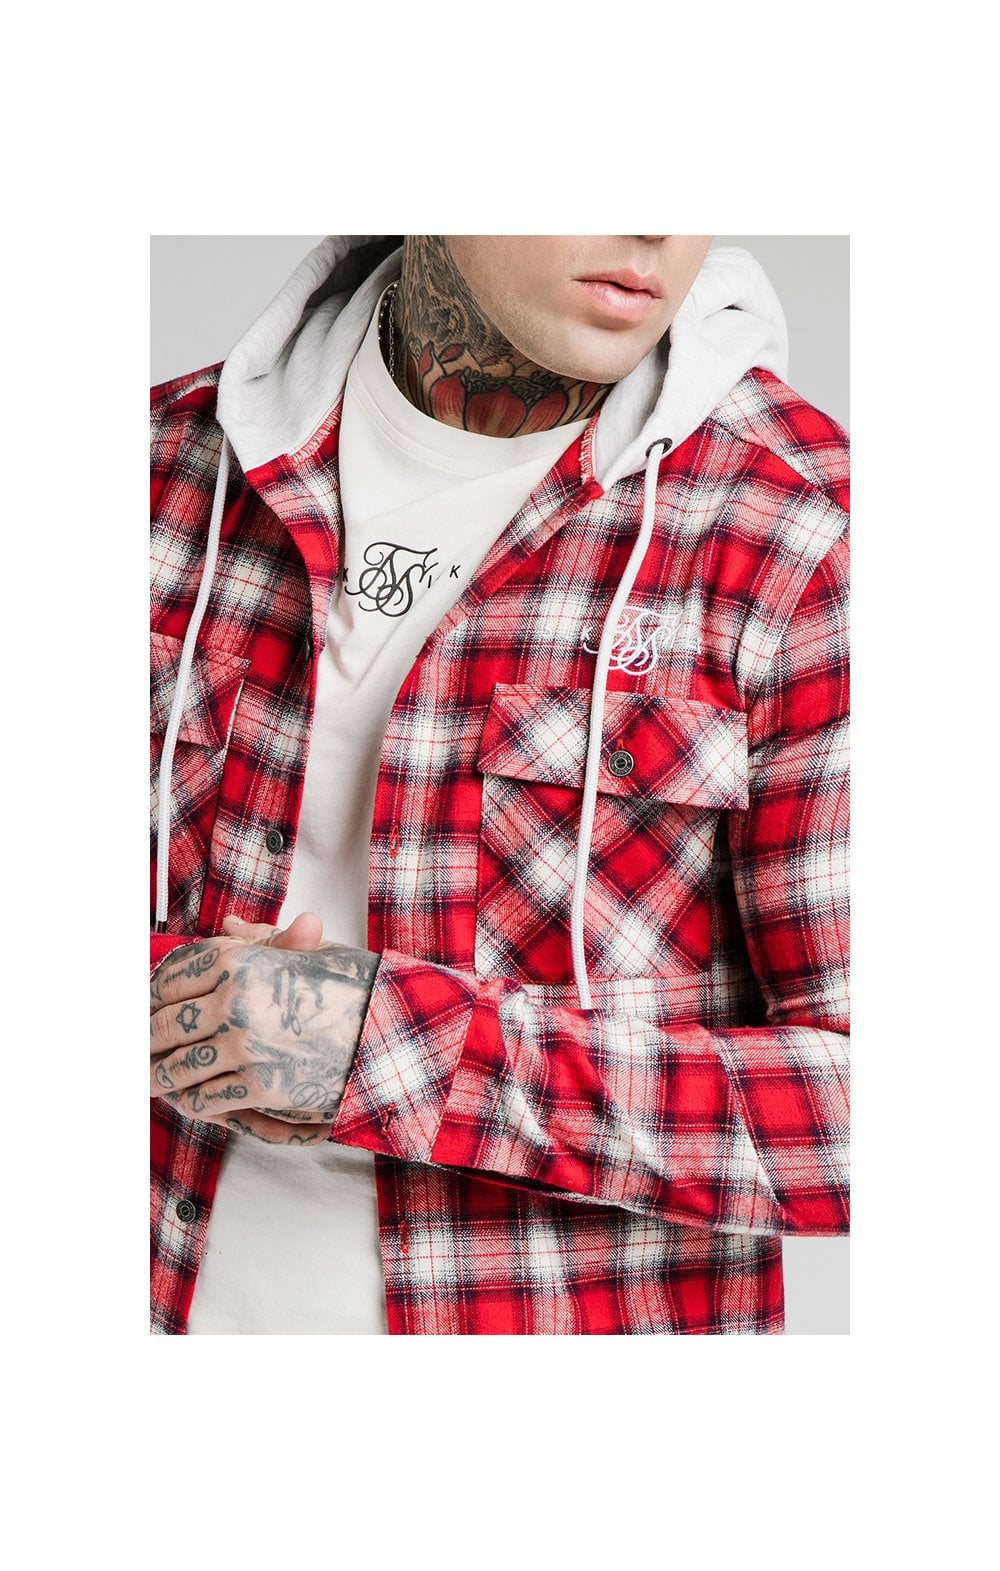 SikSilk L/S Hooded Flannel Shirt Jacket - Red & Off White (1)